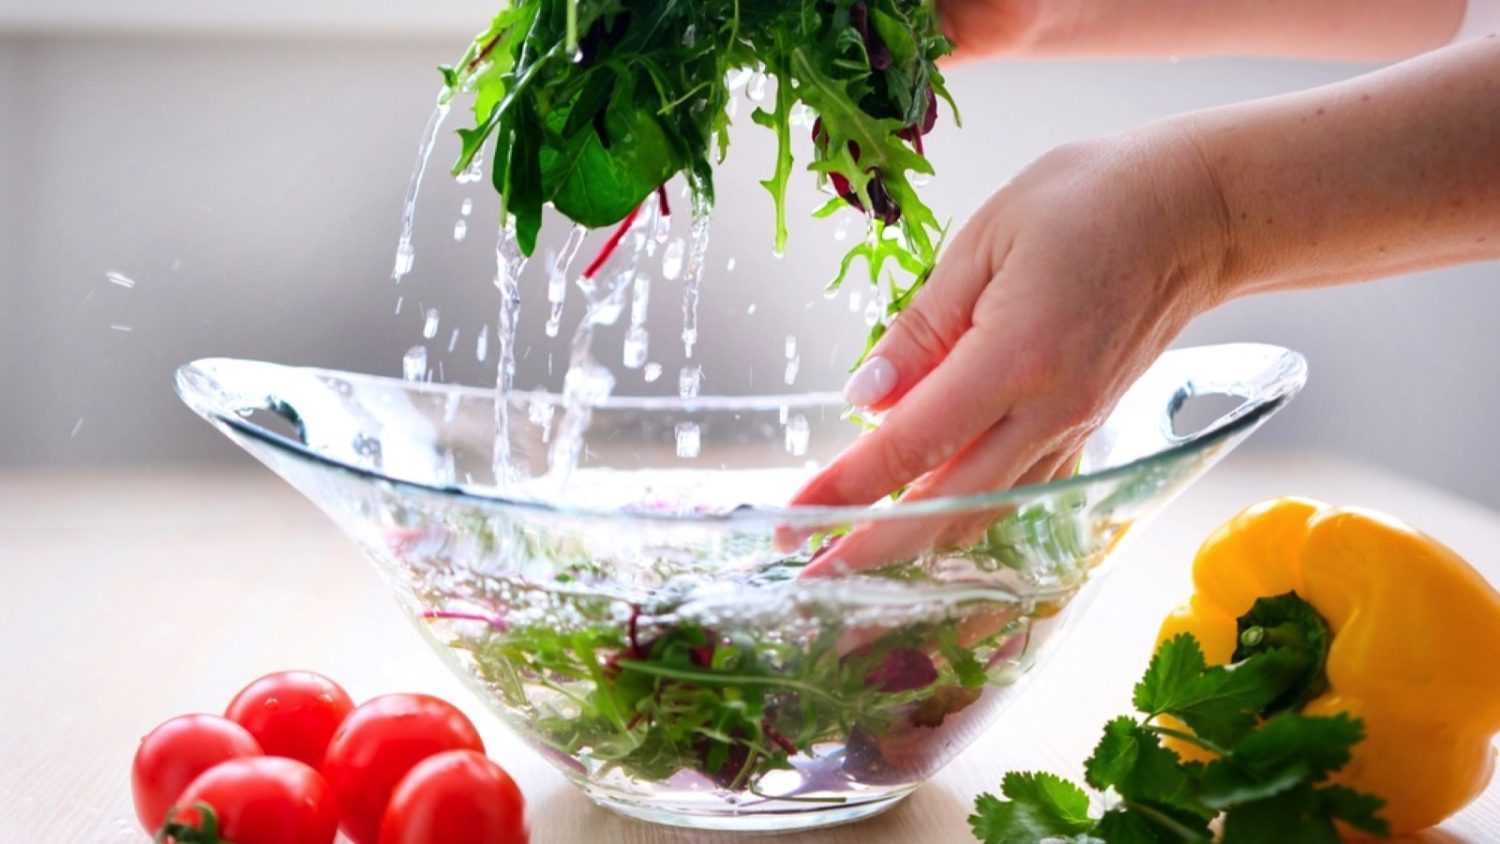 Washing vegetables in water